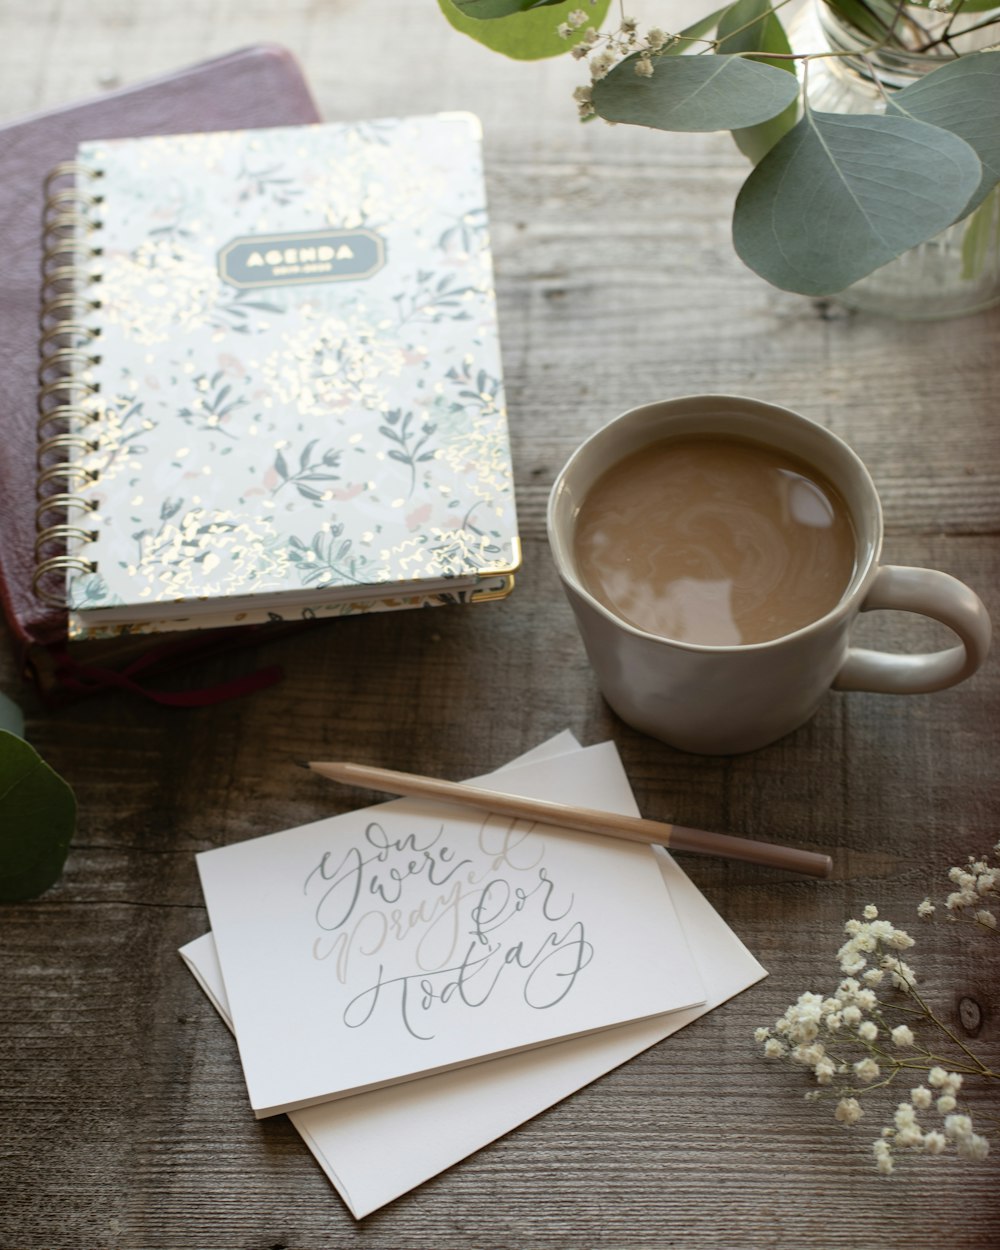 white and purple floral notebook beside white ceramic mug